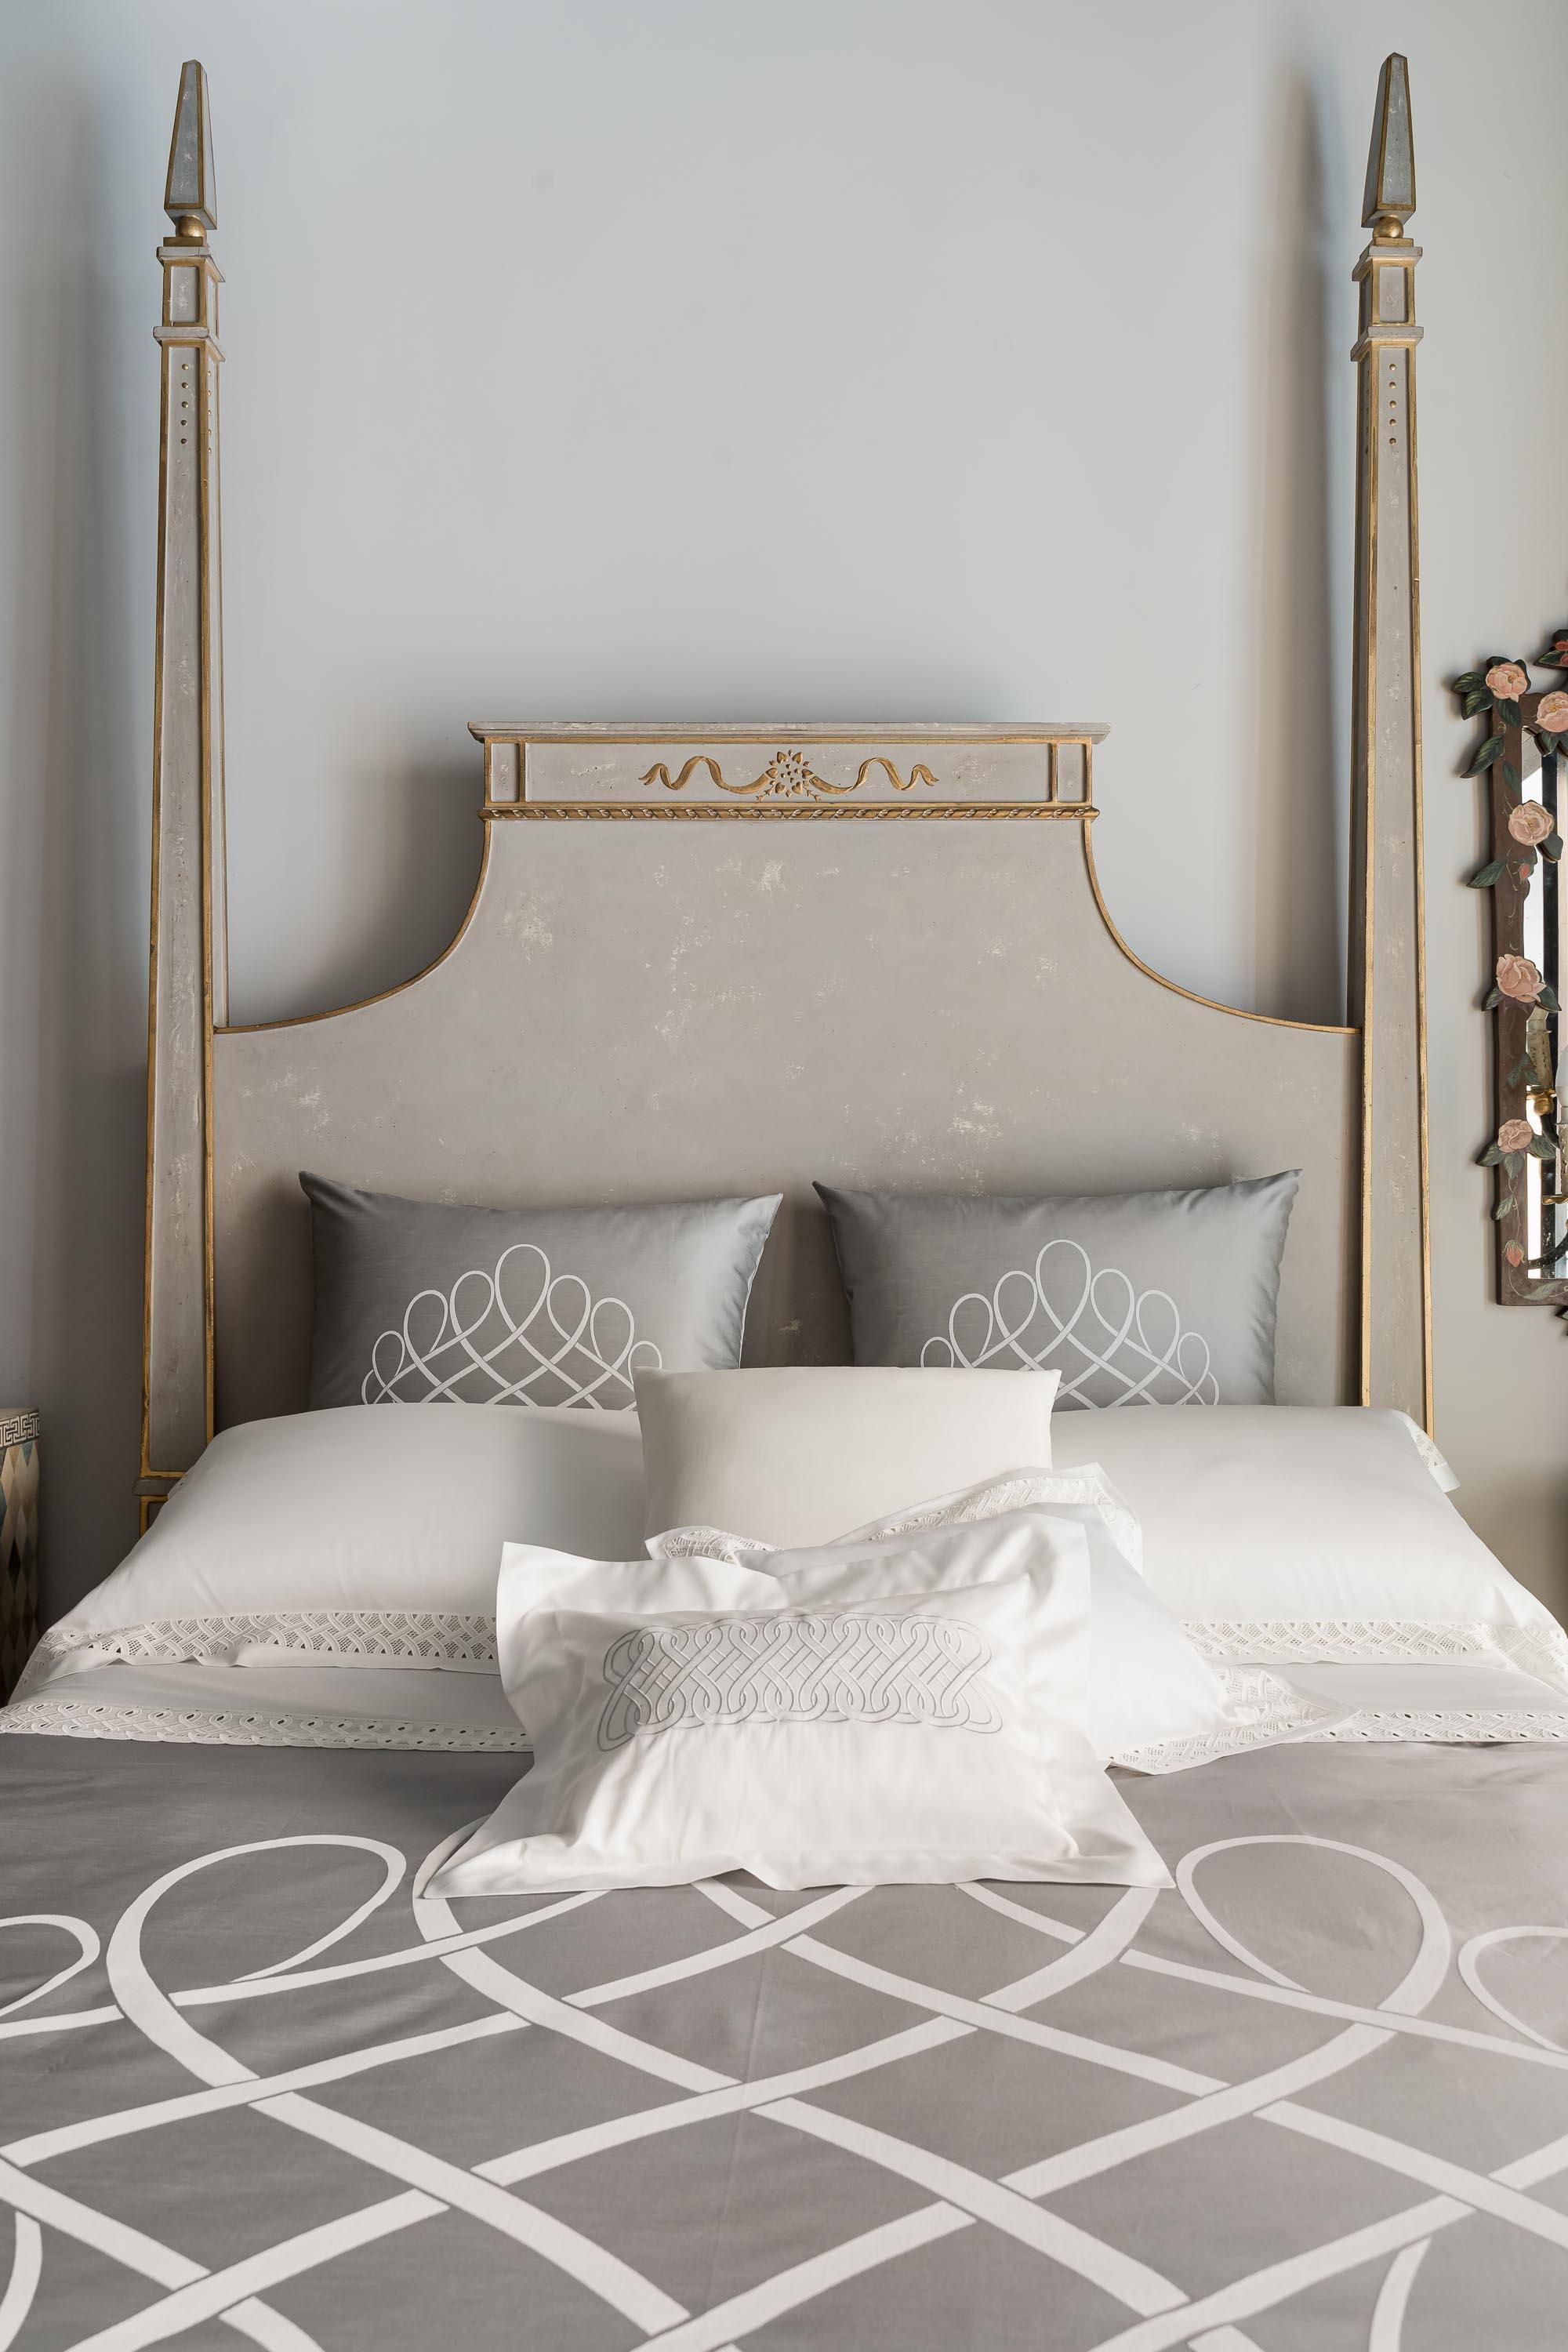 From our hand-painted furniture collection, we are pleased to introduce you to our queen size, light grey Tintoretto Bed with full posts and obelisc finials.
This Tintoretto Bed is finished with our Argento (light grey) main color, contrasting